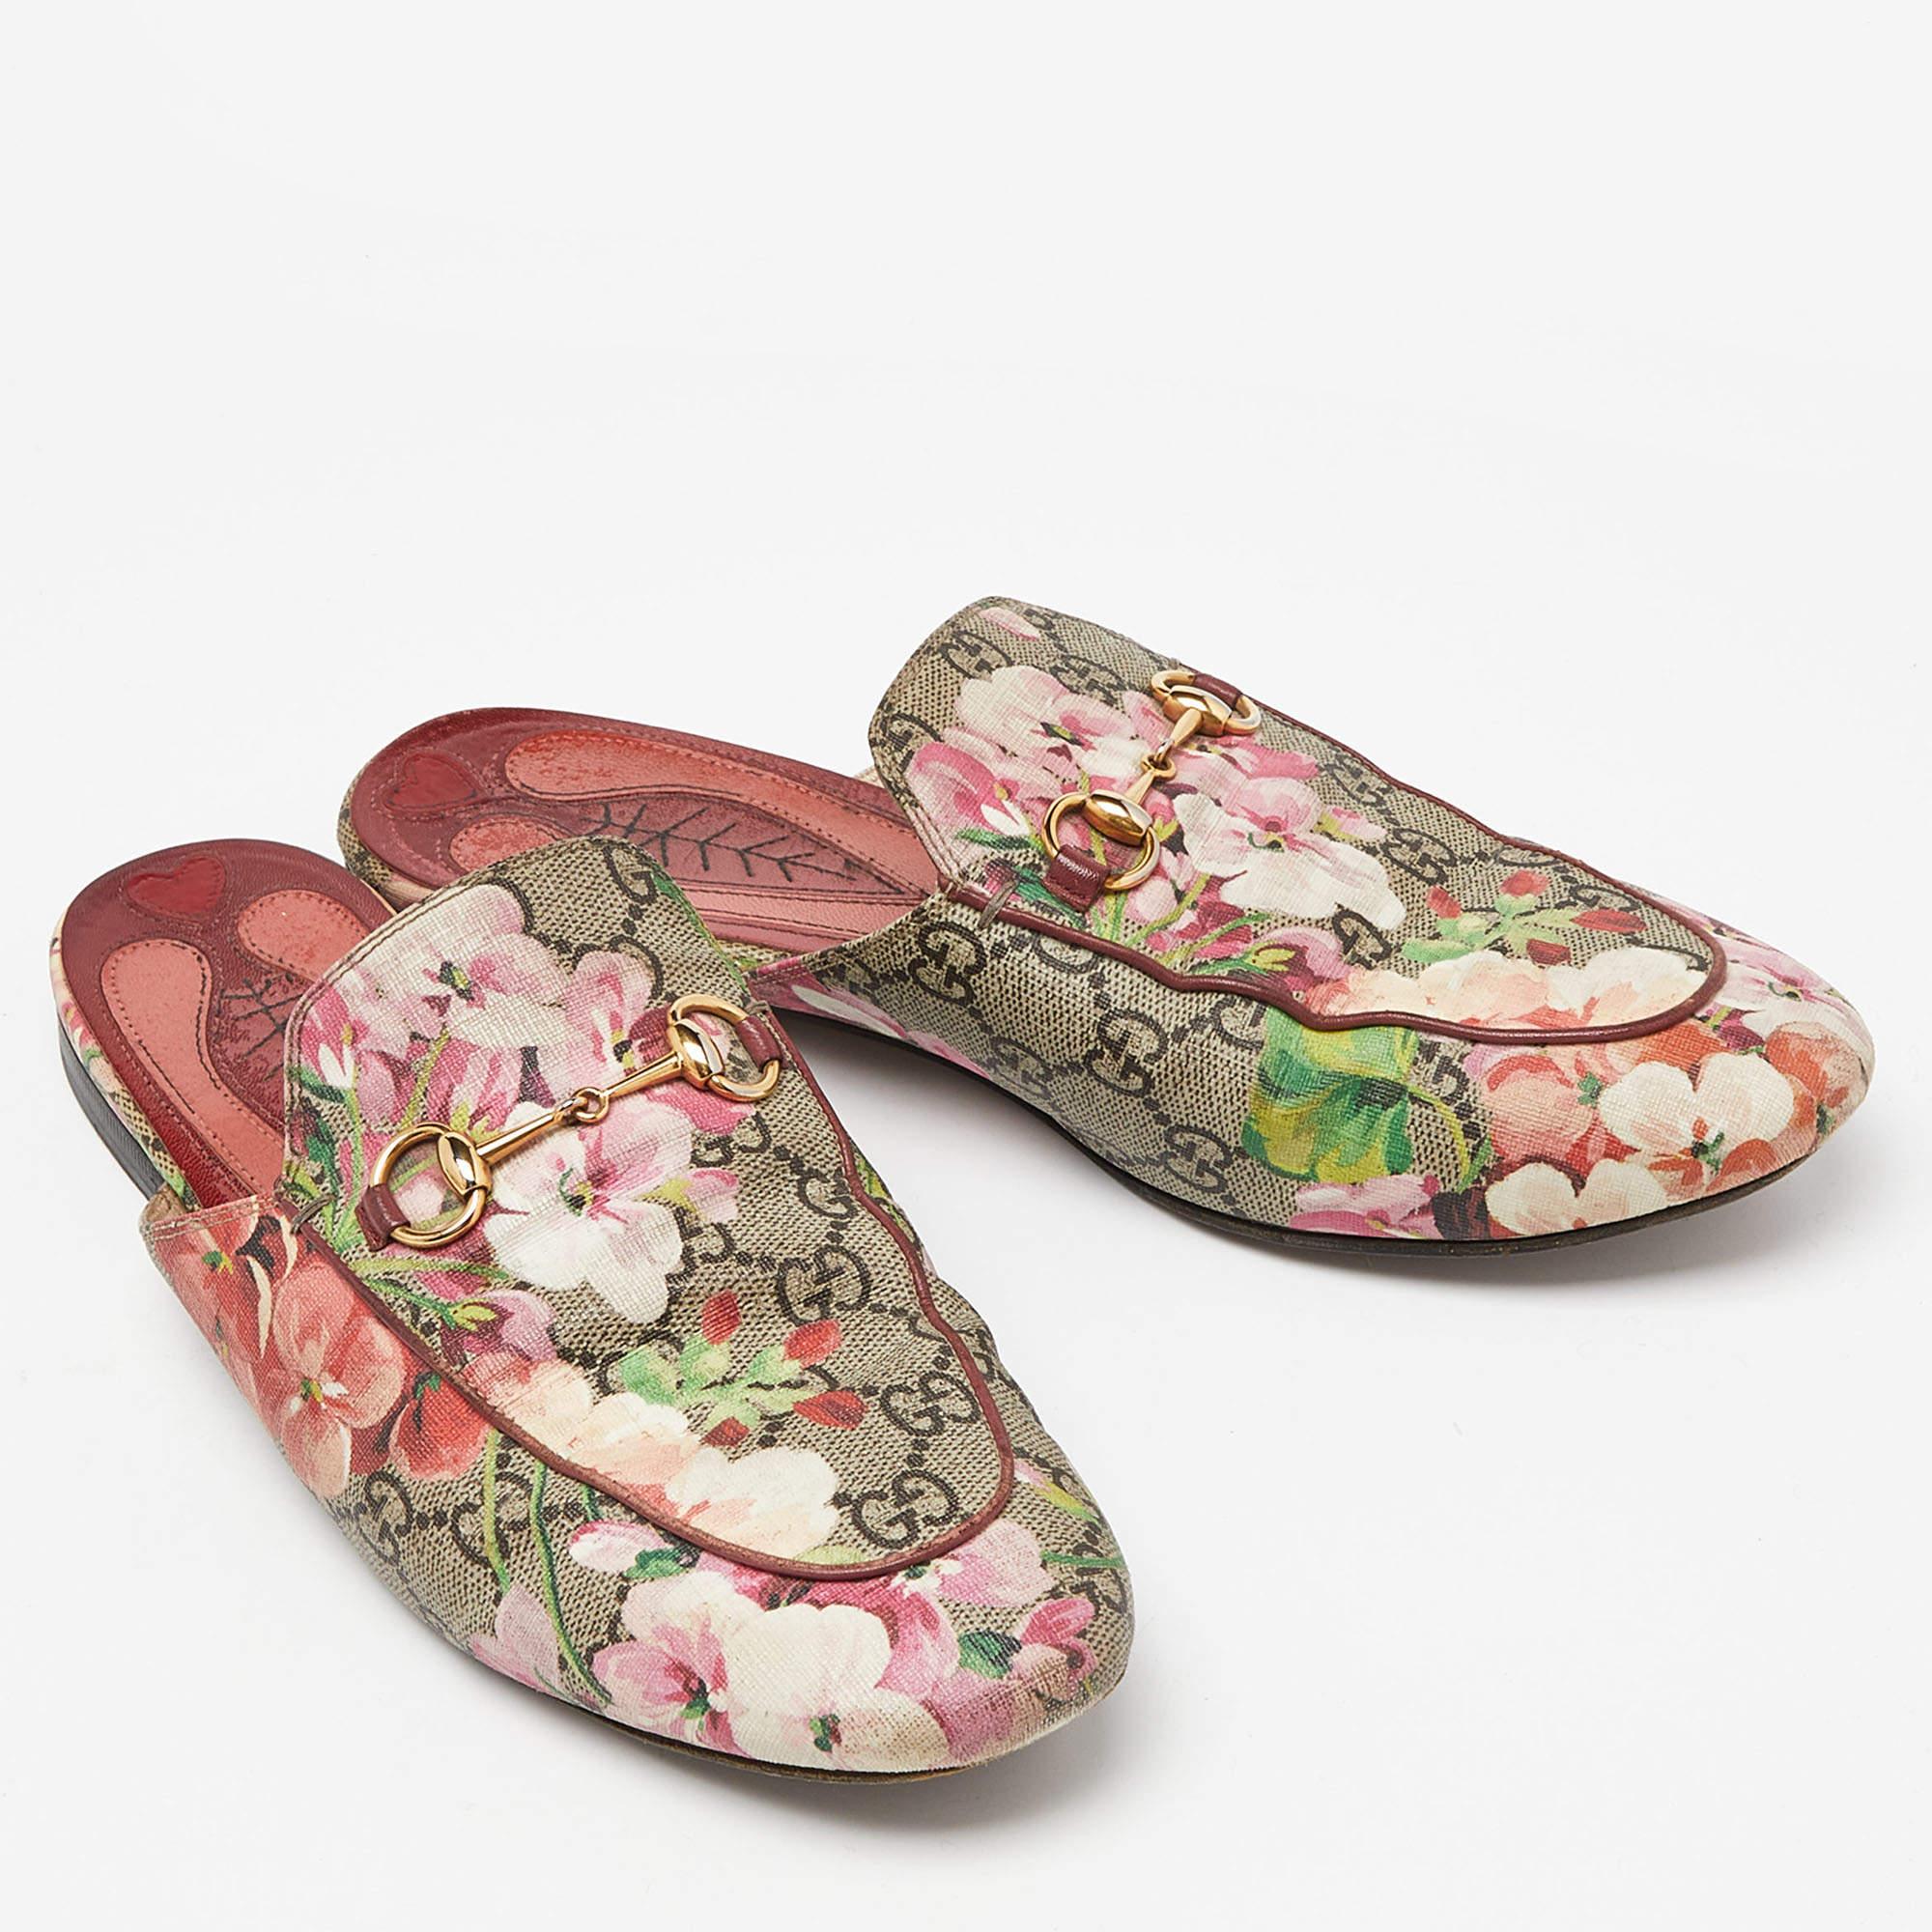 Gucci Beige/Brown Blooms Print GG Supreme Canvas Princetown Flat Mules Size 40 2